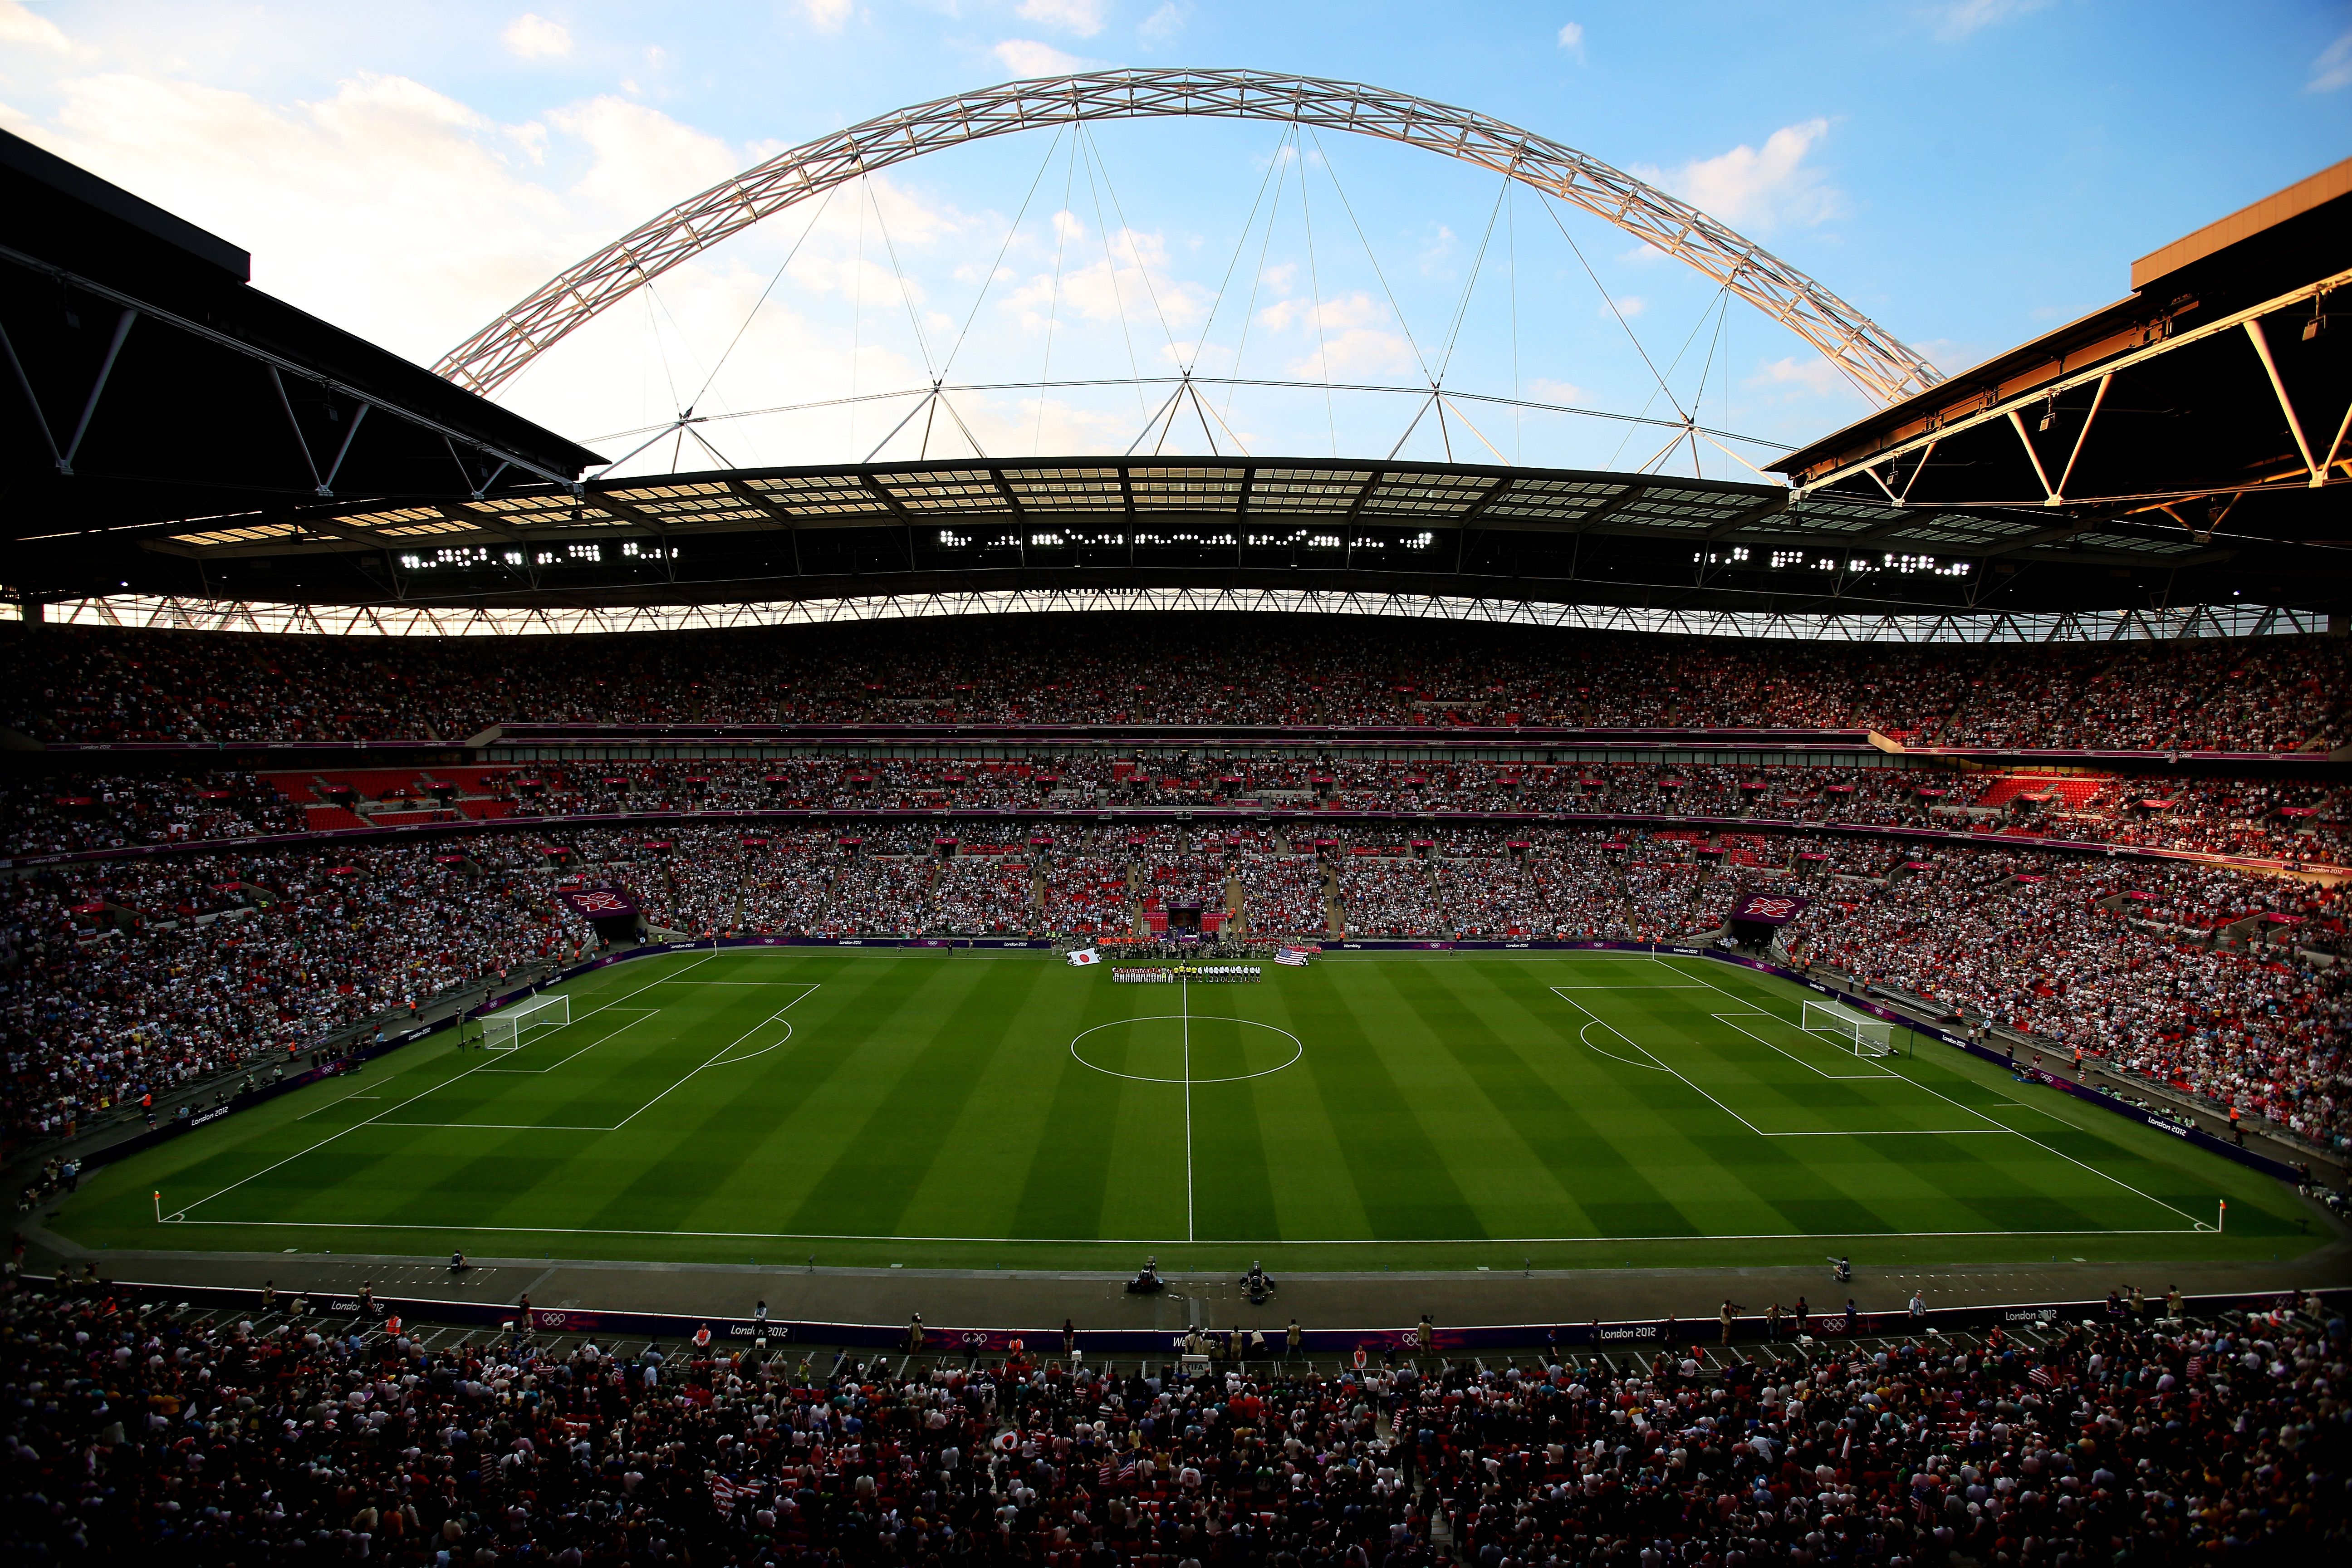 The United States take on Japan in the Women's Football at Wembley Stadium